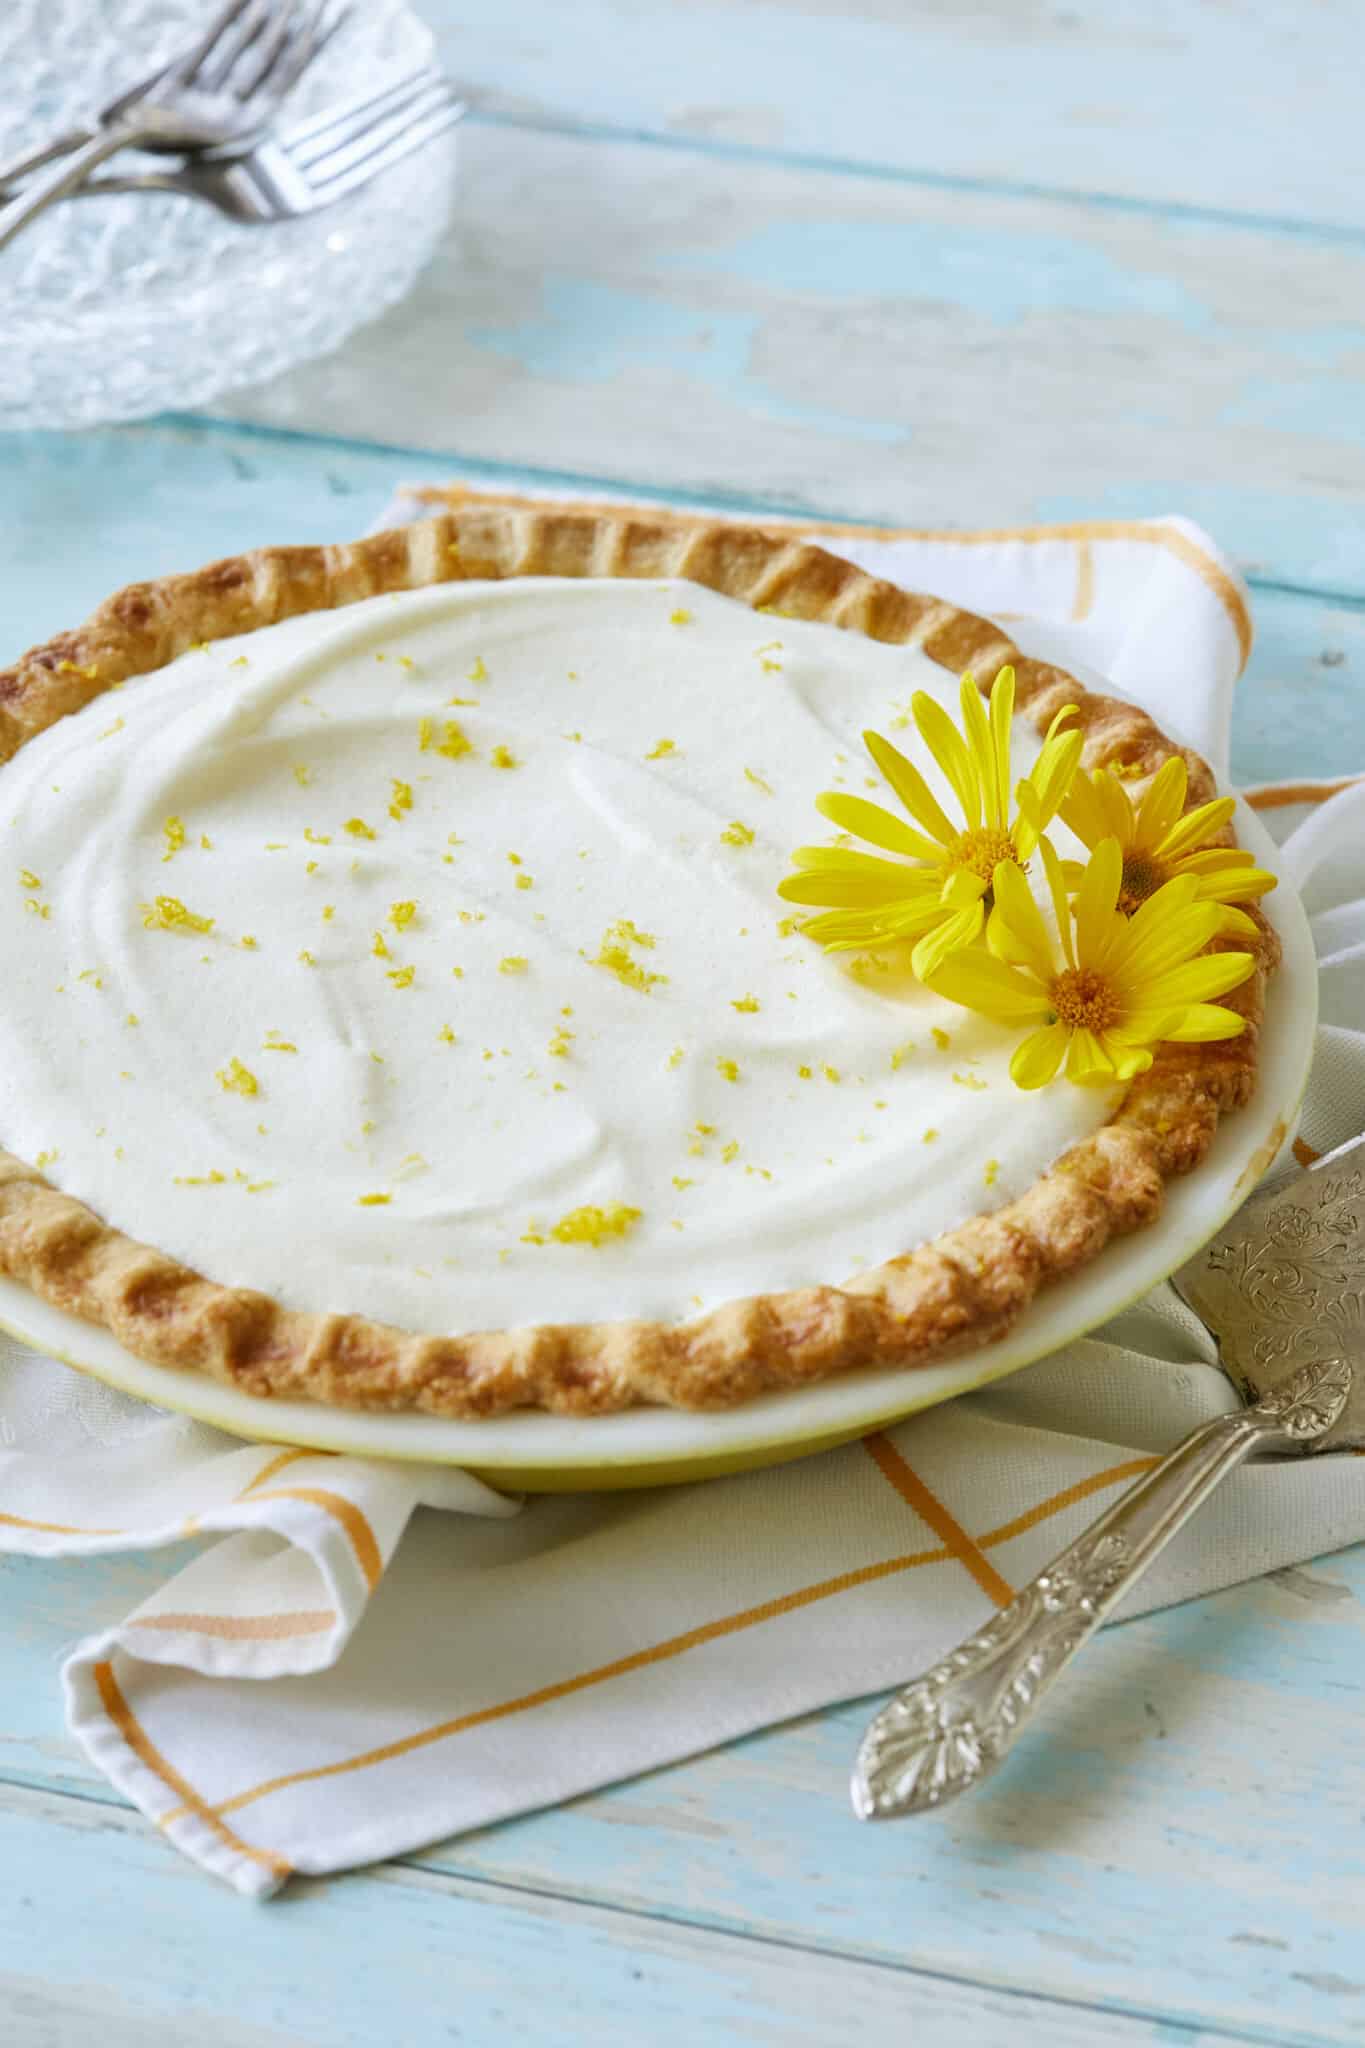 Luscious Creamy Lemon Chiffon Pie has a golden curst with a white, silky filling, topped with refreshing lemon zest and two flowers. 